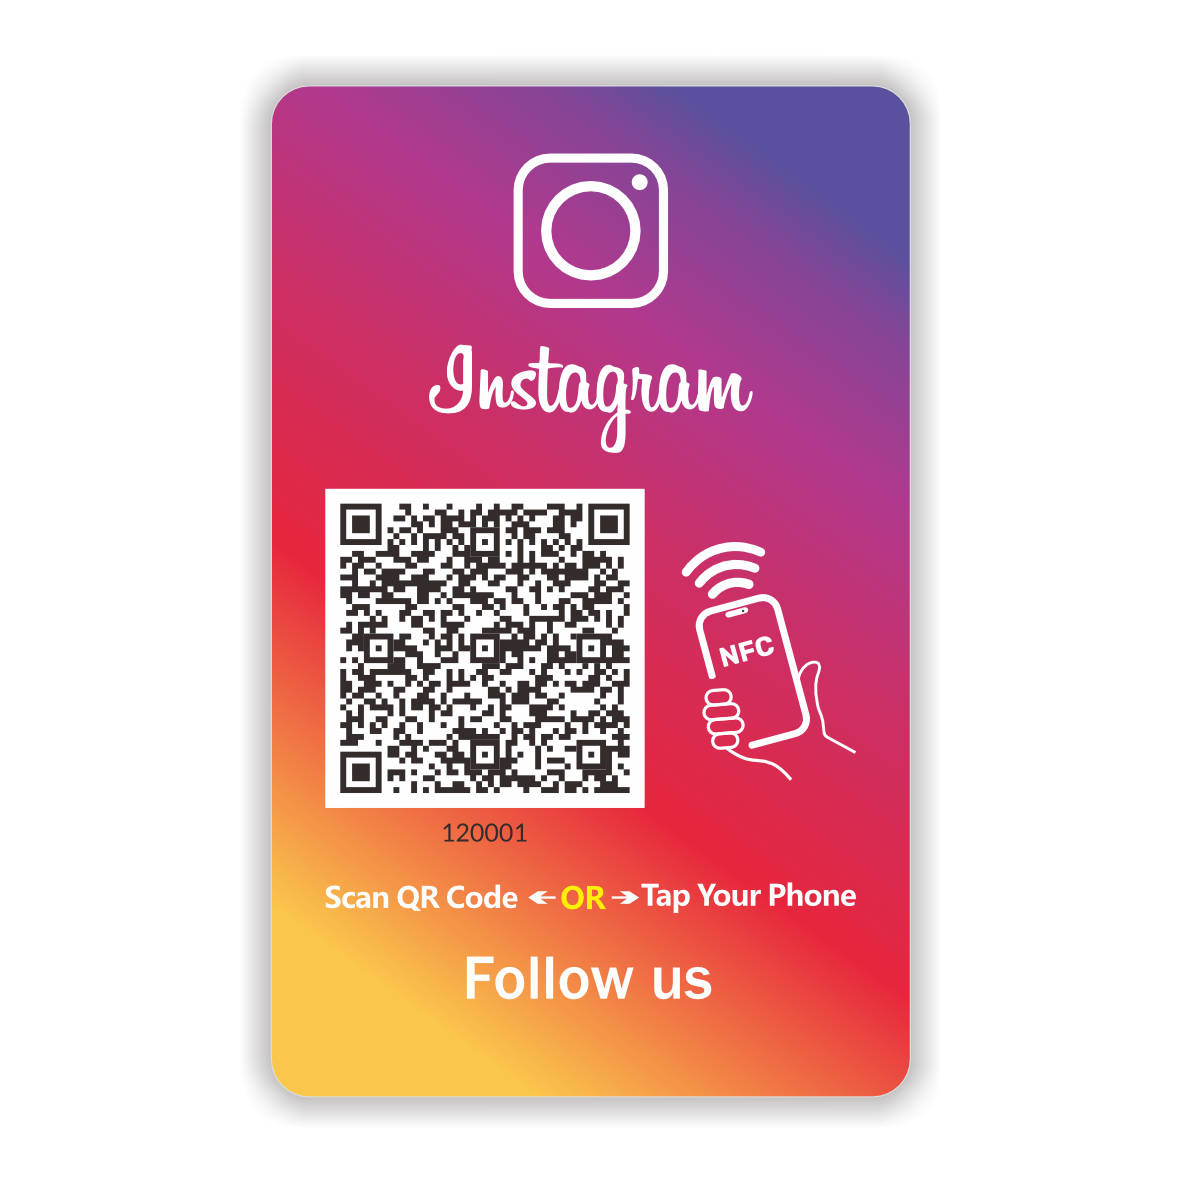 Contactless Sharing Smart NFC 'Follow Us On Instagram' Card Touchless Reusable QR Code Tap Review Card